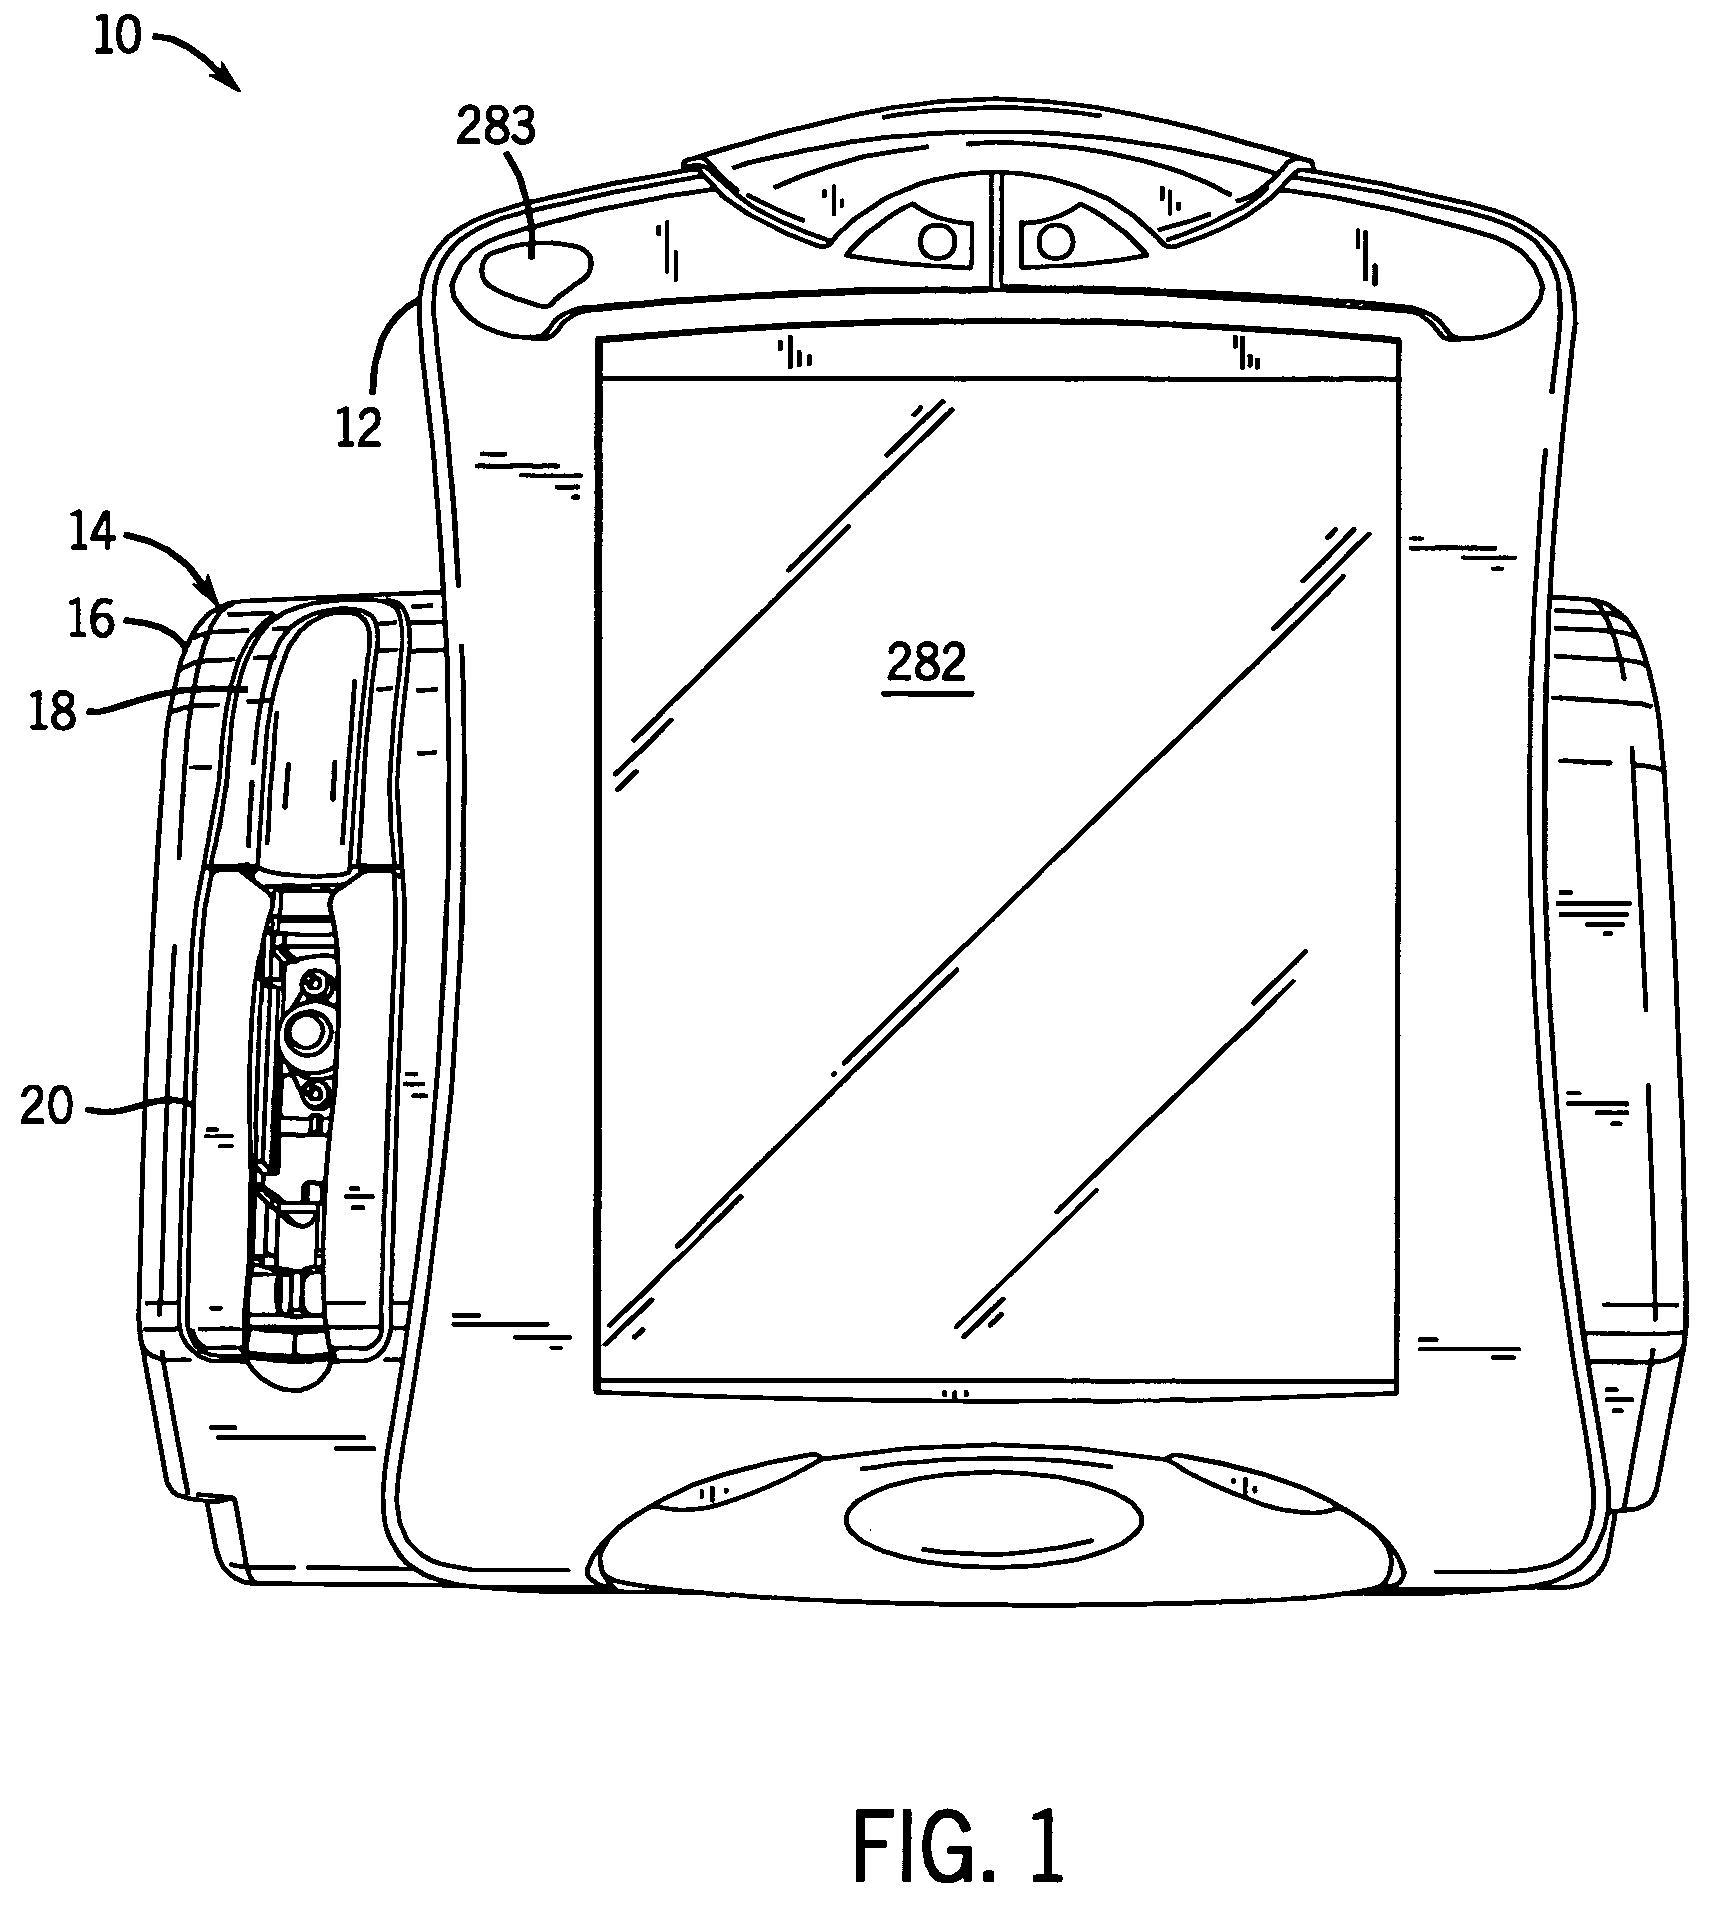 Fluid delivery device identification and loading system